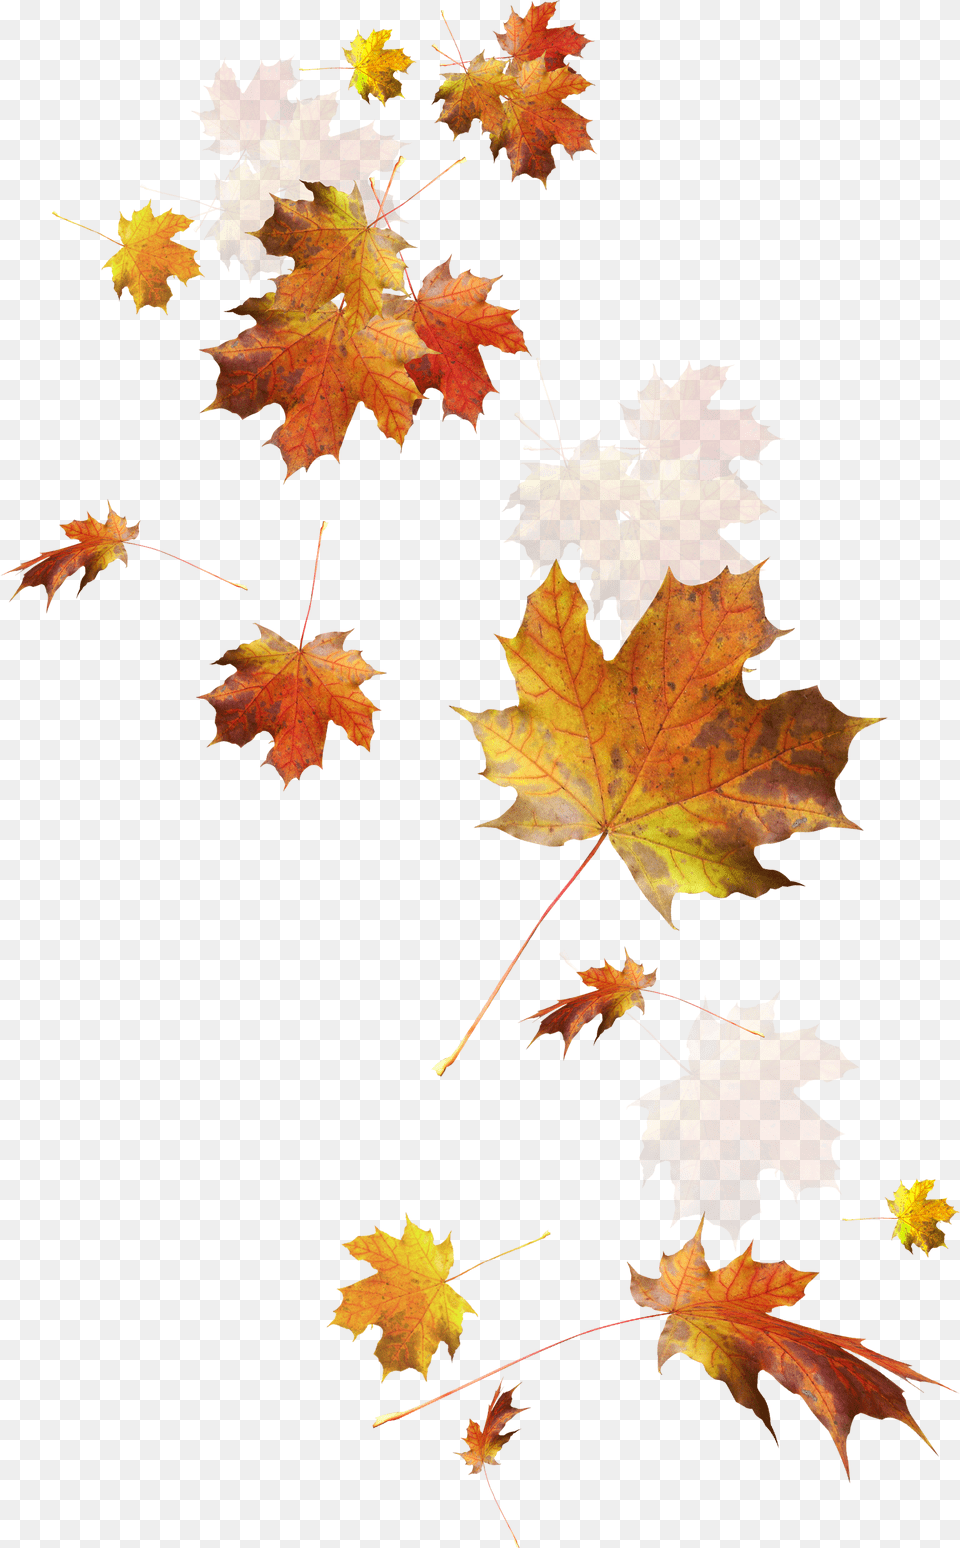 Autumn Color Leaves Leaf Falling Download Hd Clipart Fall Leaves Transparent Background, Maple, Plant, Tree Png